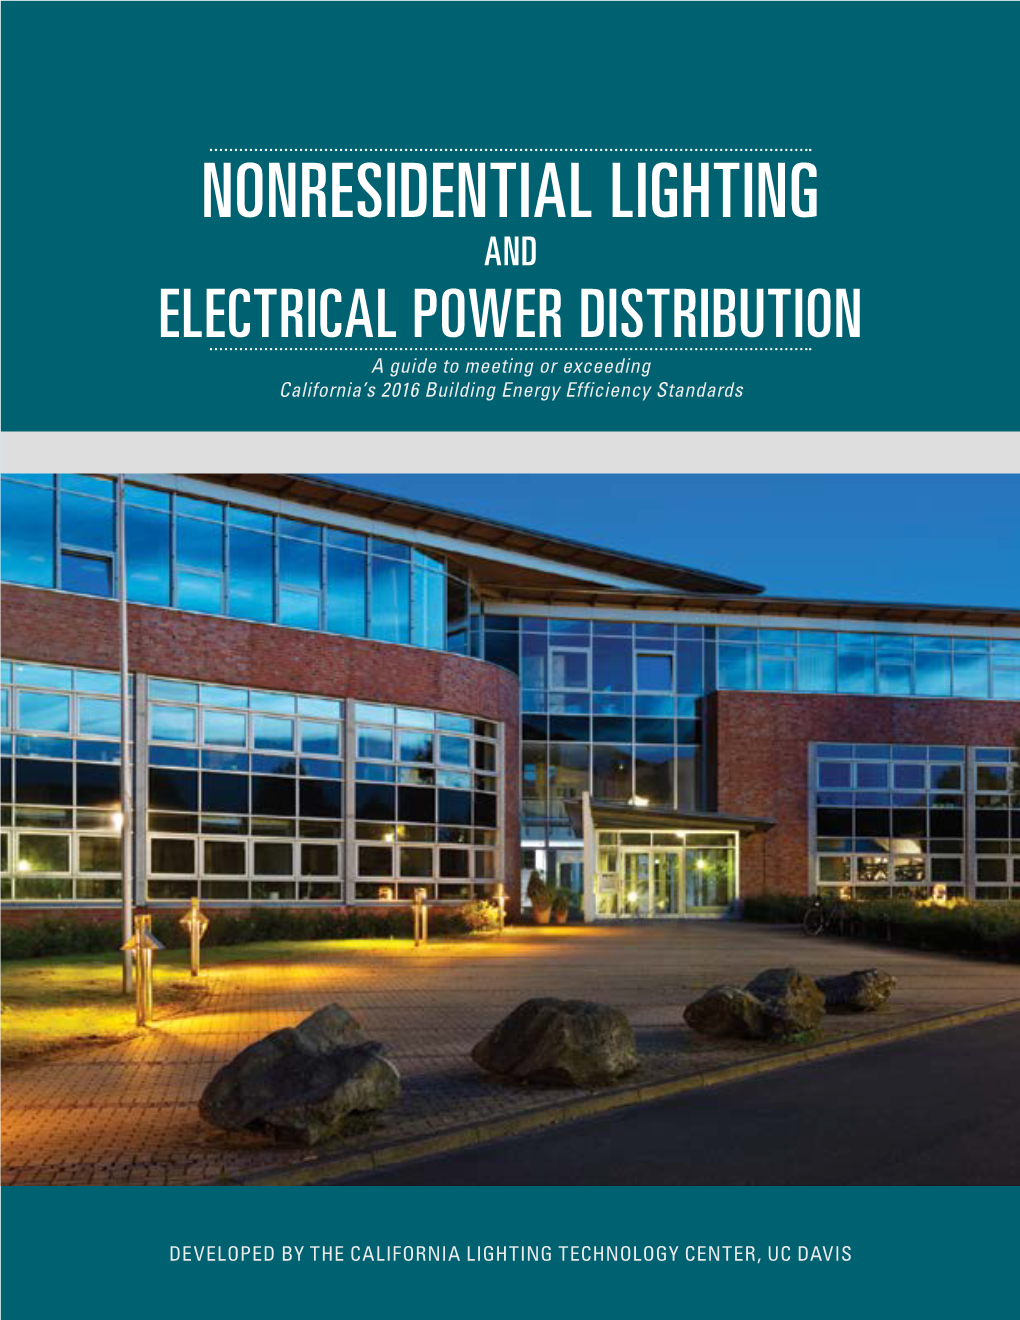 NONRESIDENTIAL LIGHTING and ELECTRICAL POWER DISTRIBUTION a Guide to Meeting Or Exceeding California’S 2016 Building Energy Efficiency Standards